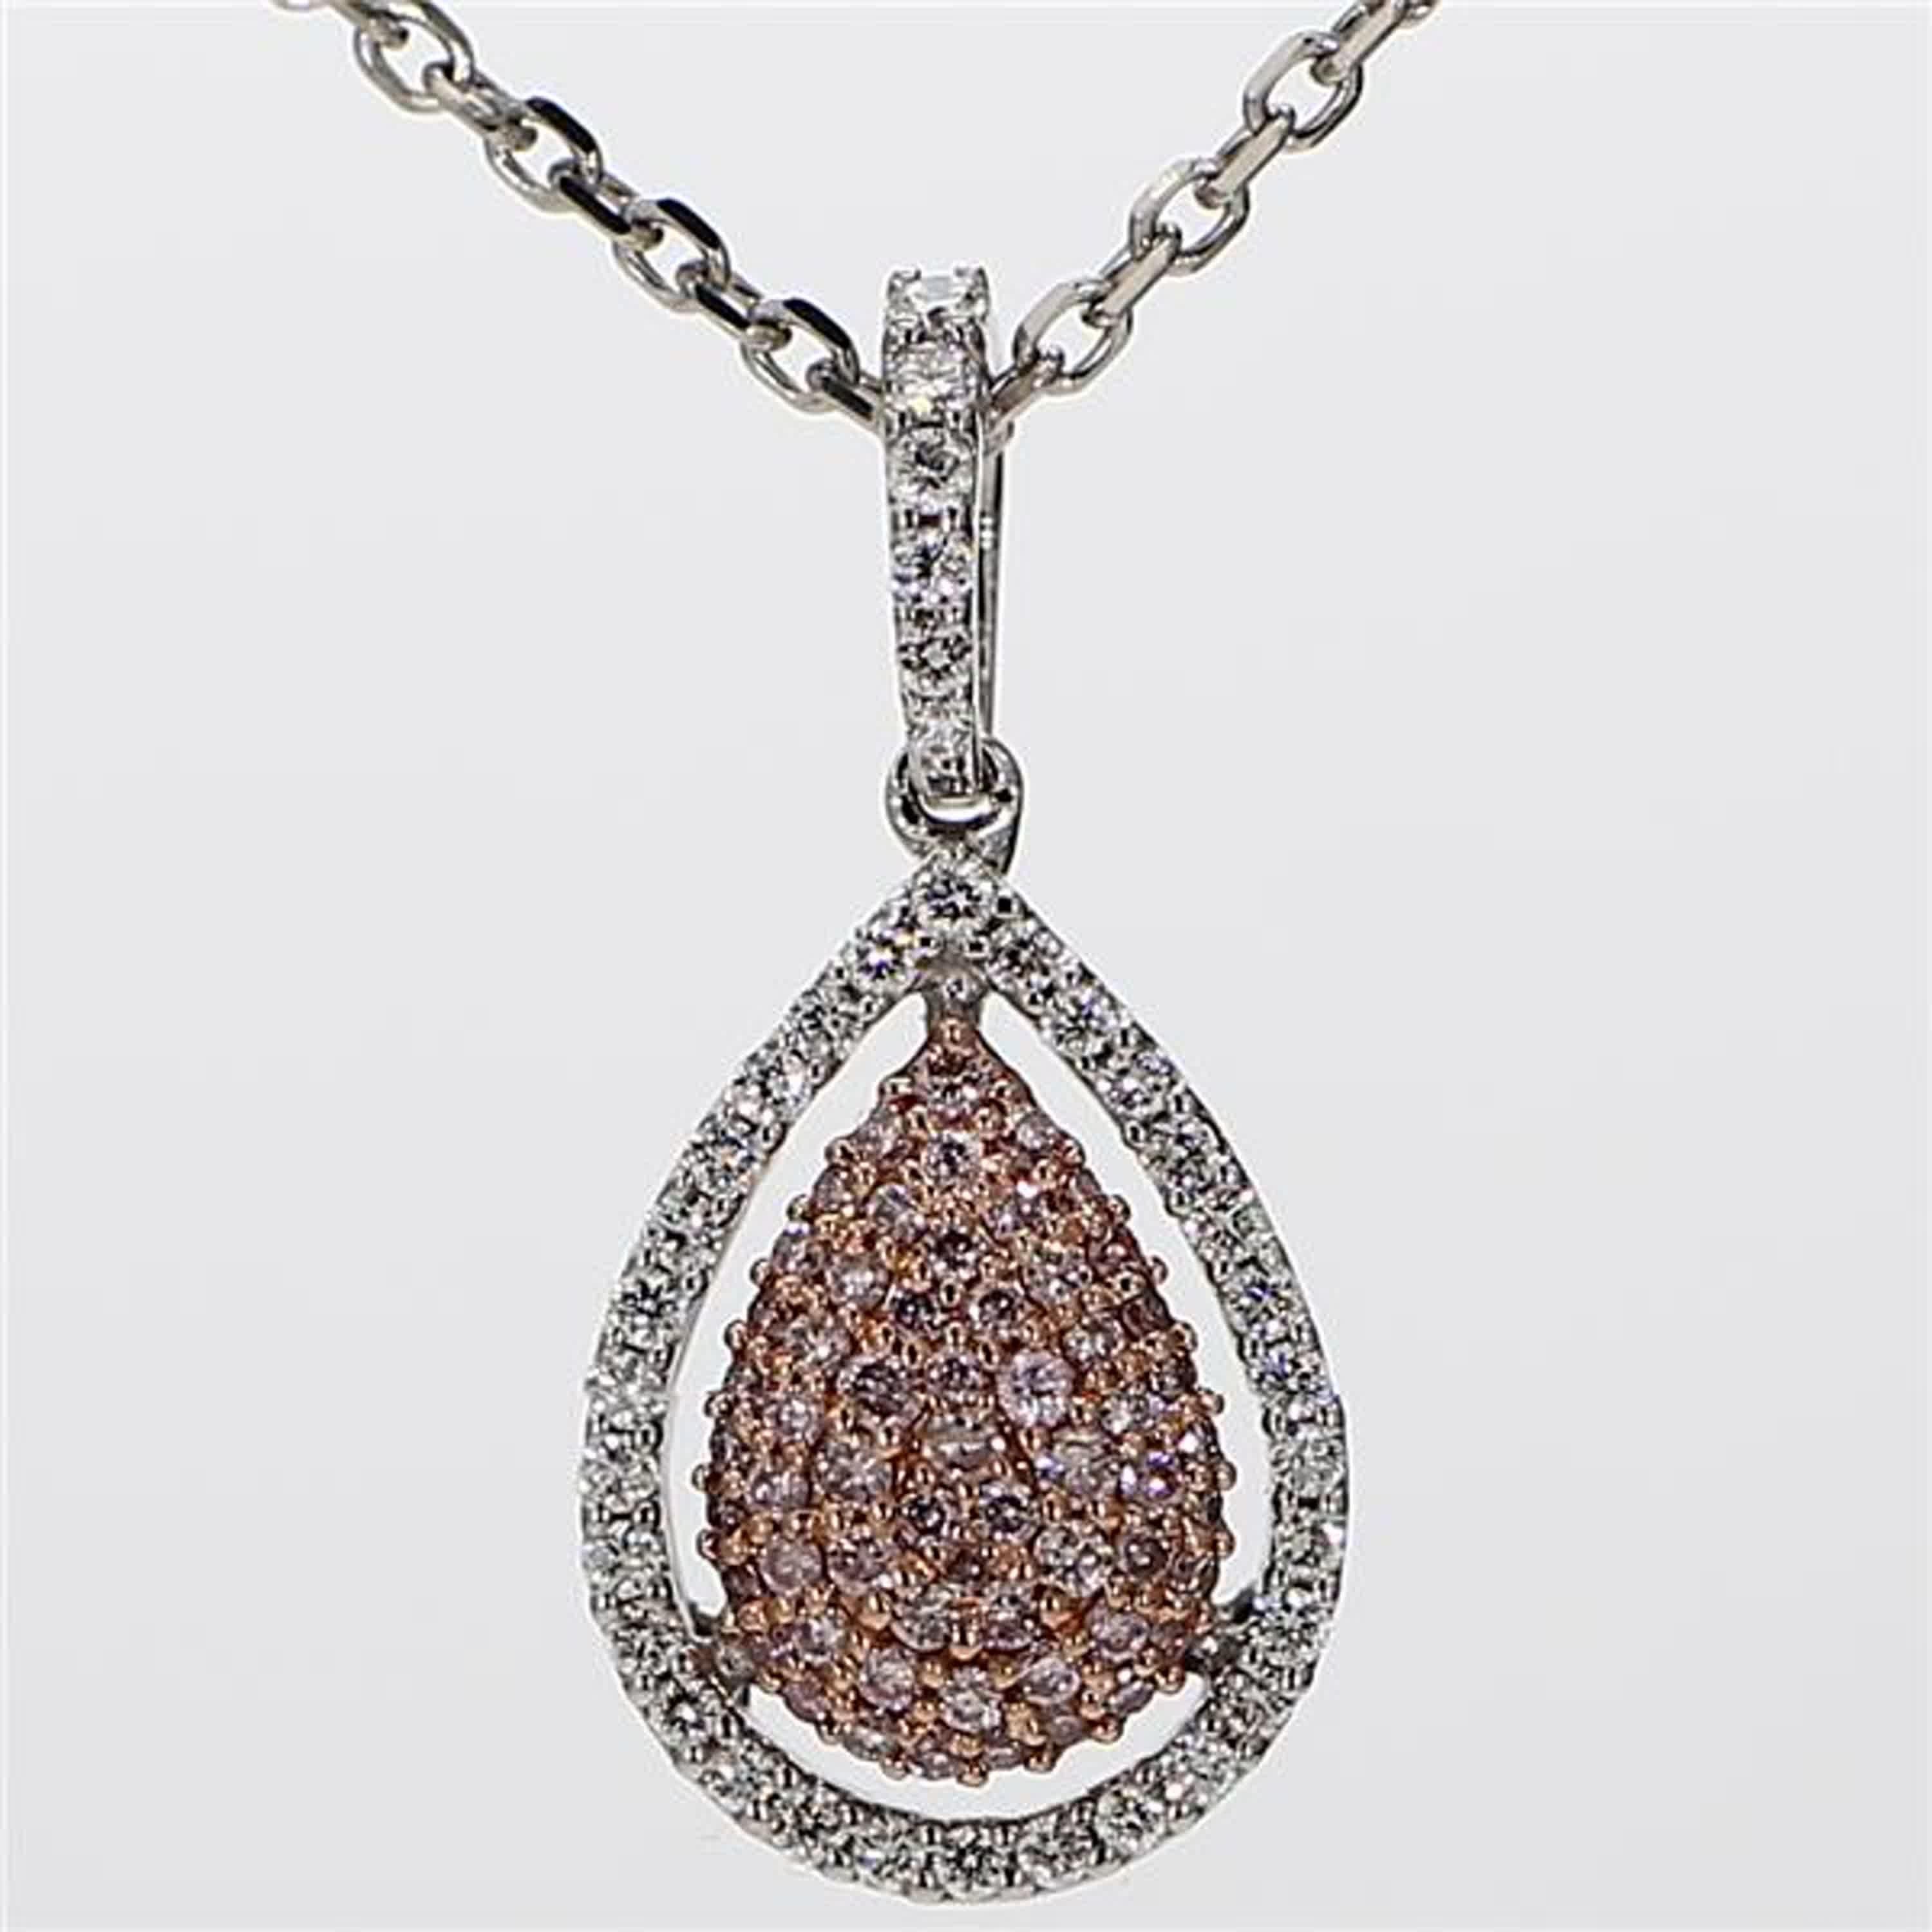 RareGemWorld's classic diamond pendant. Mounted in a beautiful 18K Rose and White Gold setting with natural round pink diamond melee complimented by natural round white diamond melee in a beautiful pear shape. This pendant is guaranteed to impress